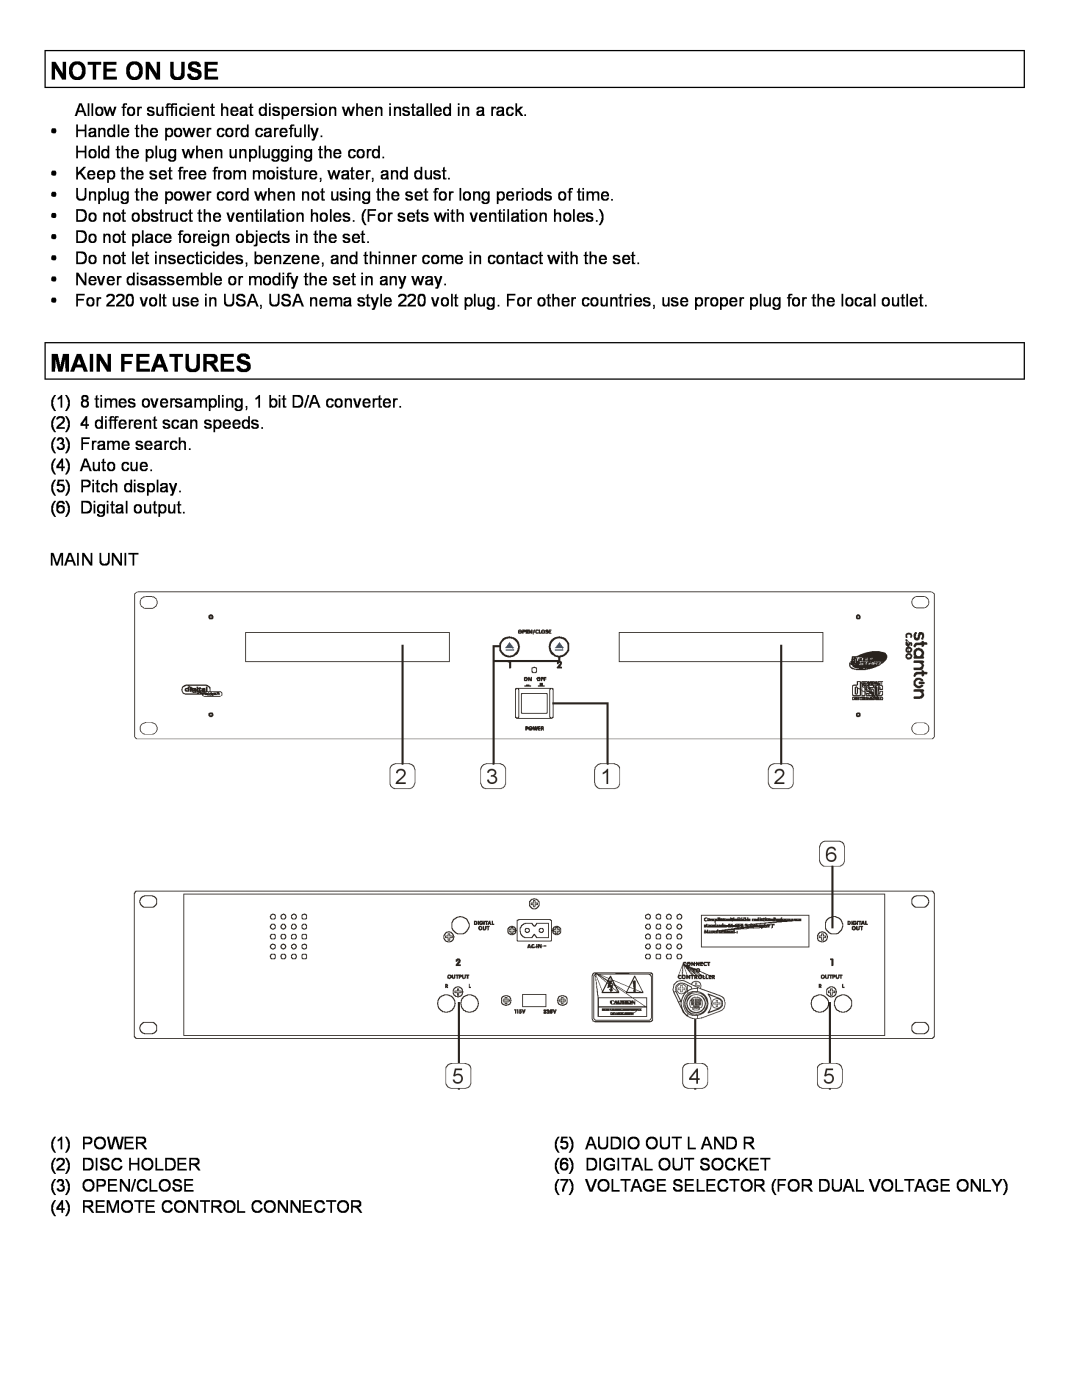 Stanton C-500 user manual Note On Use, Main Features 